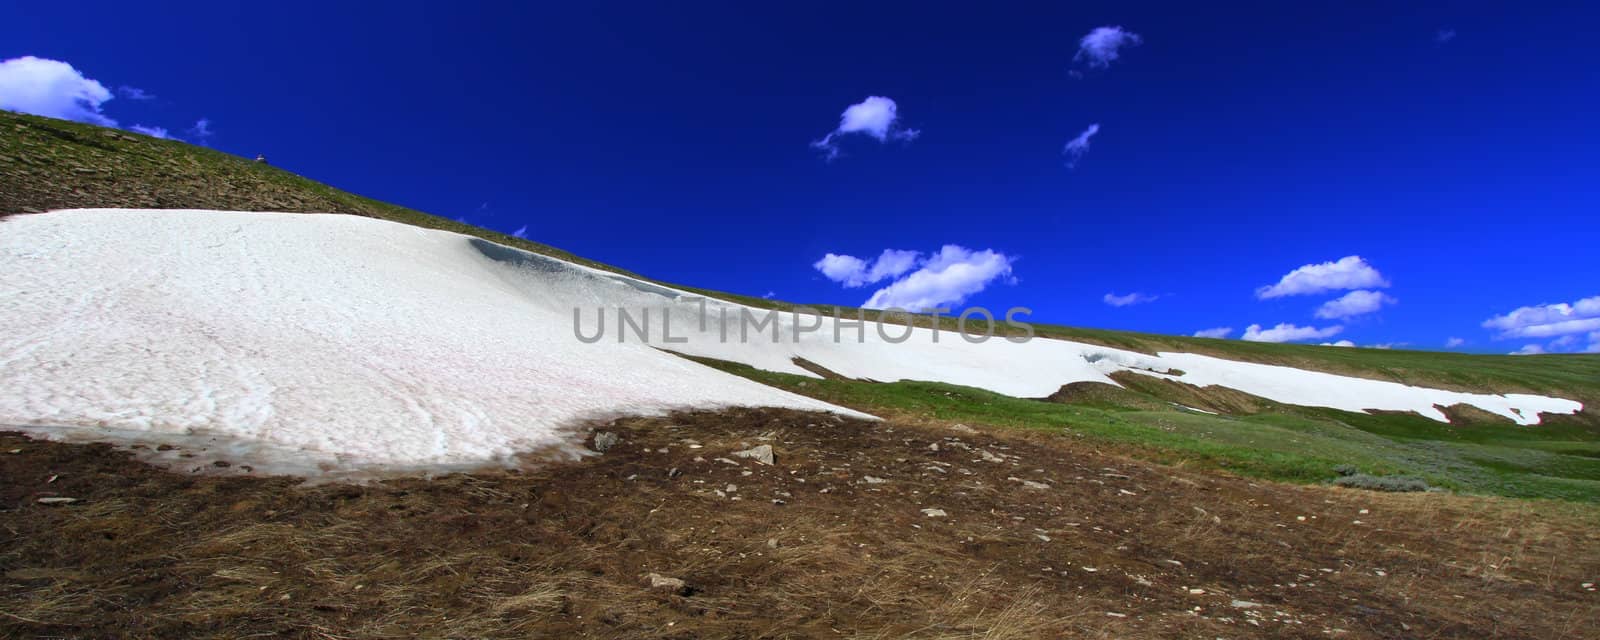 Snow lingers in the high elevations of the Bighorn Mountains on a sunny summer day.